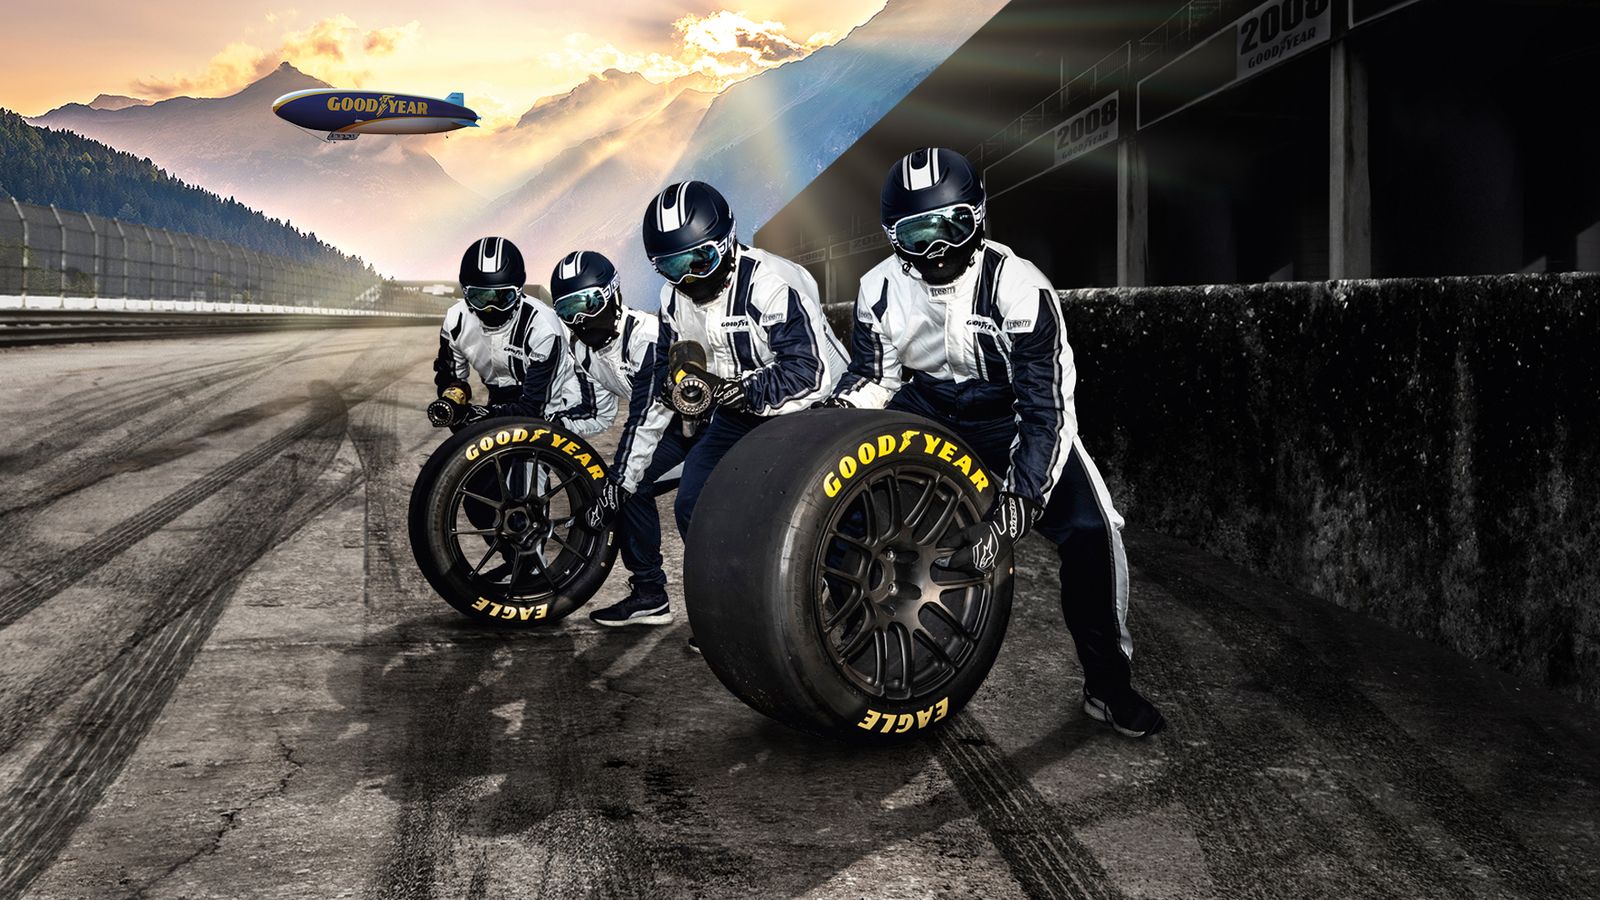 Goodyear – the DNA of competition